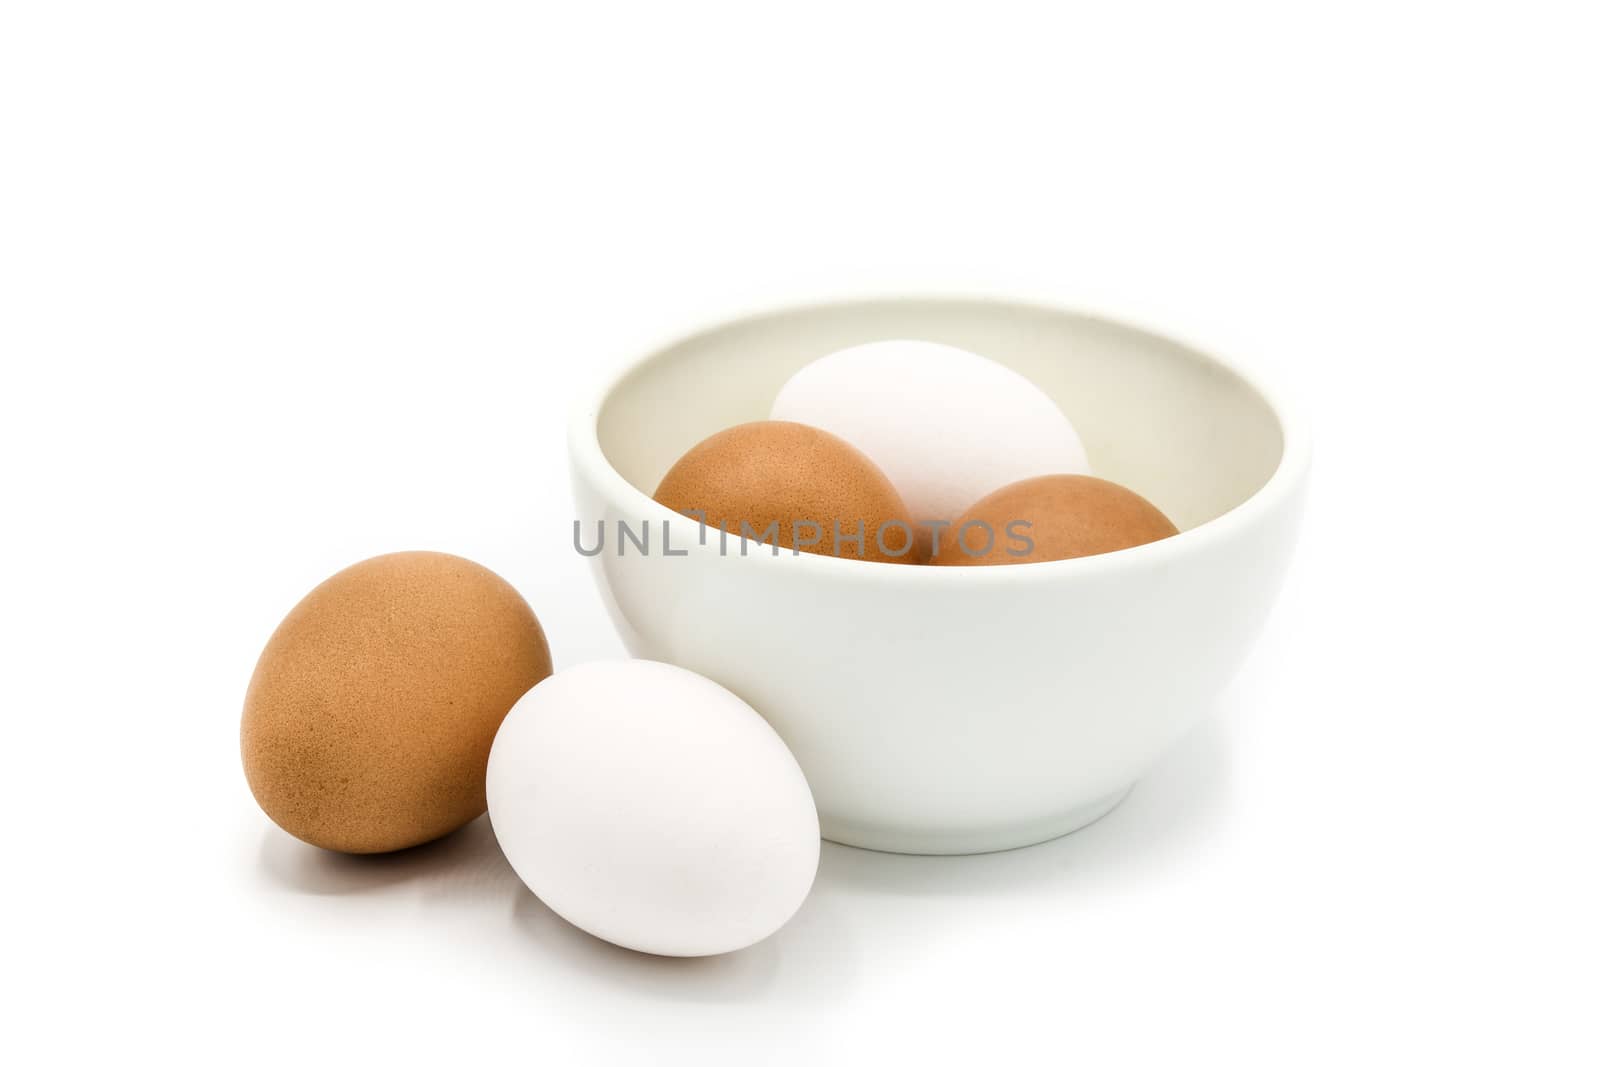 Brown and white eggs in a bowl isolated on white background